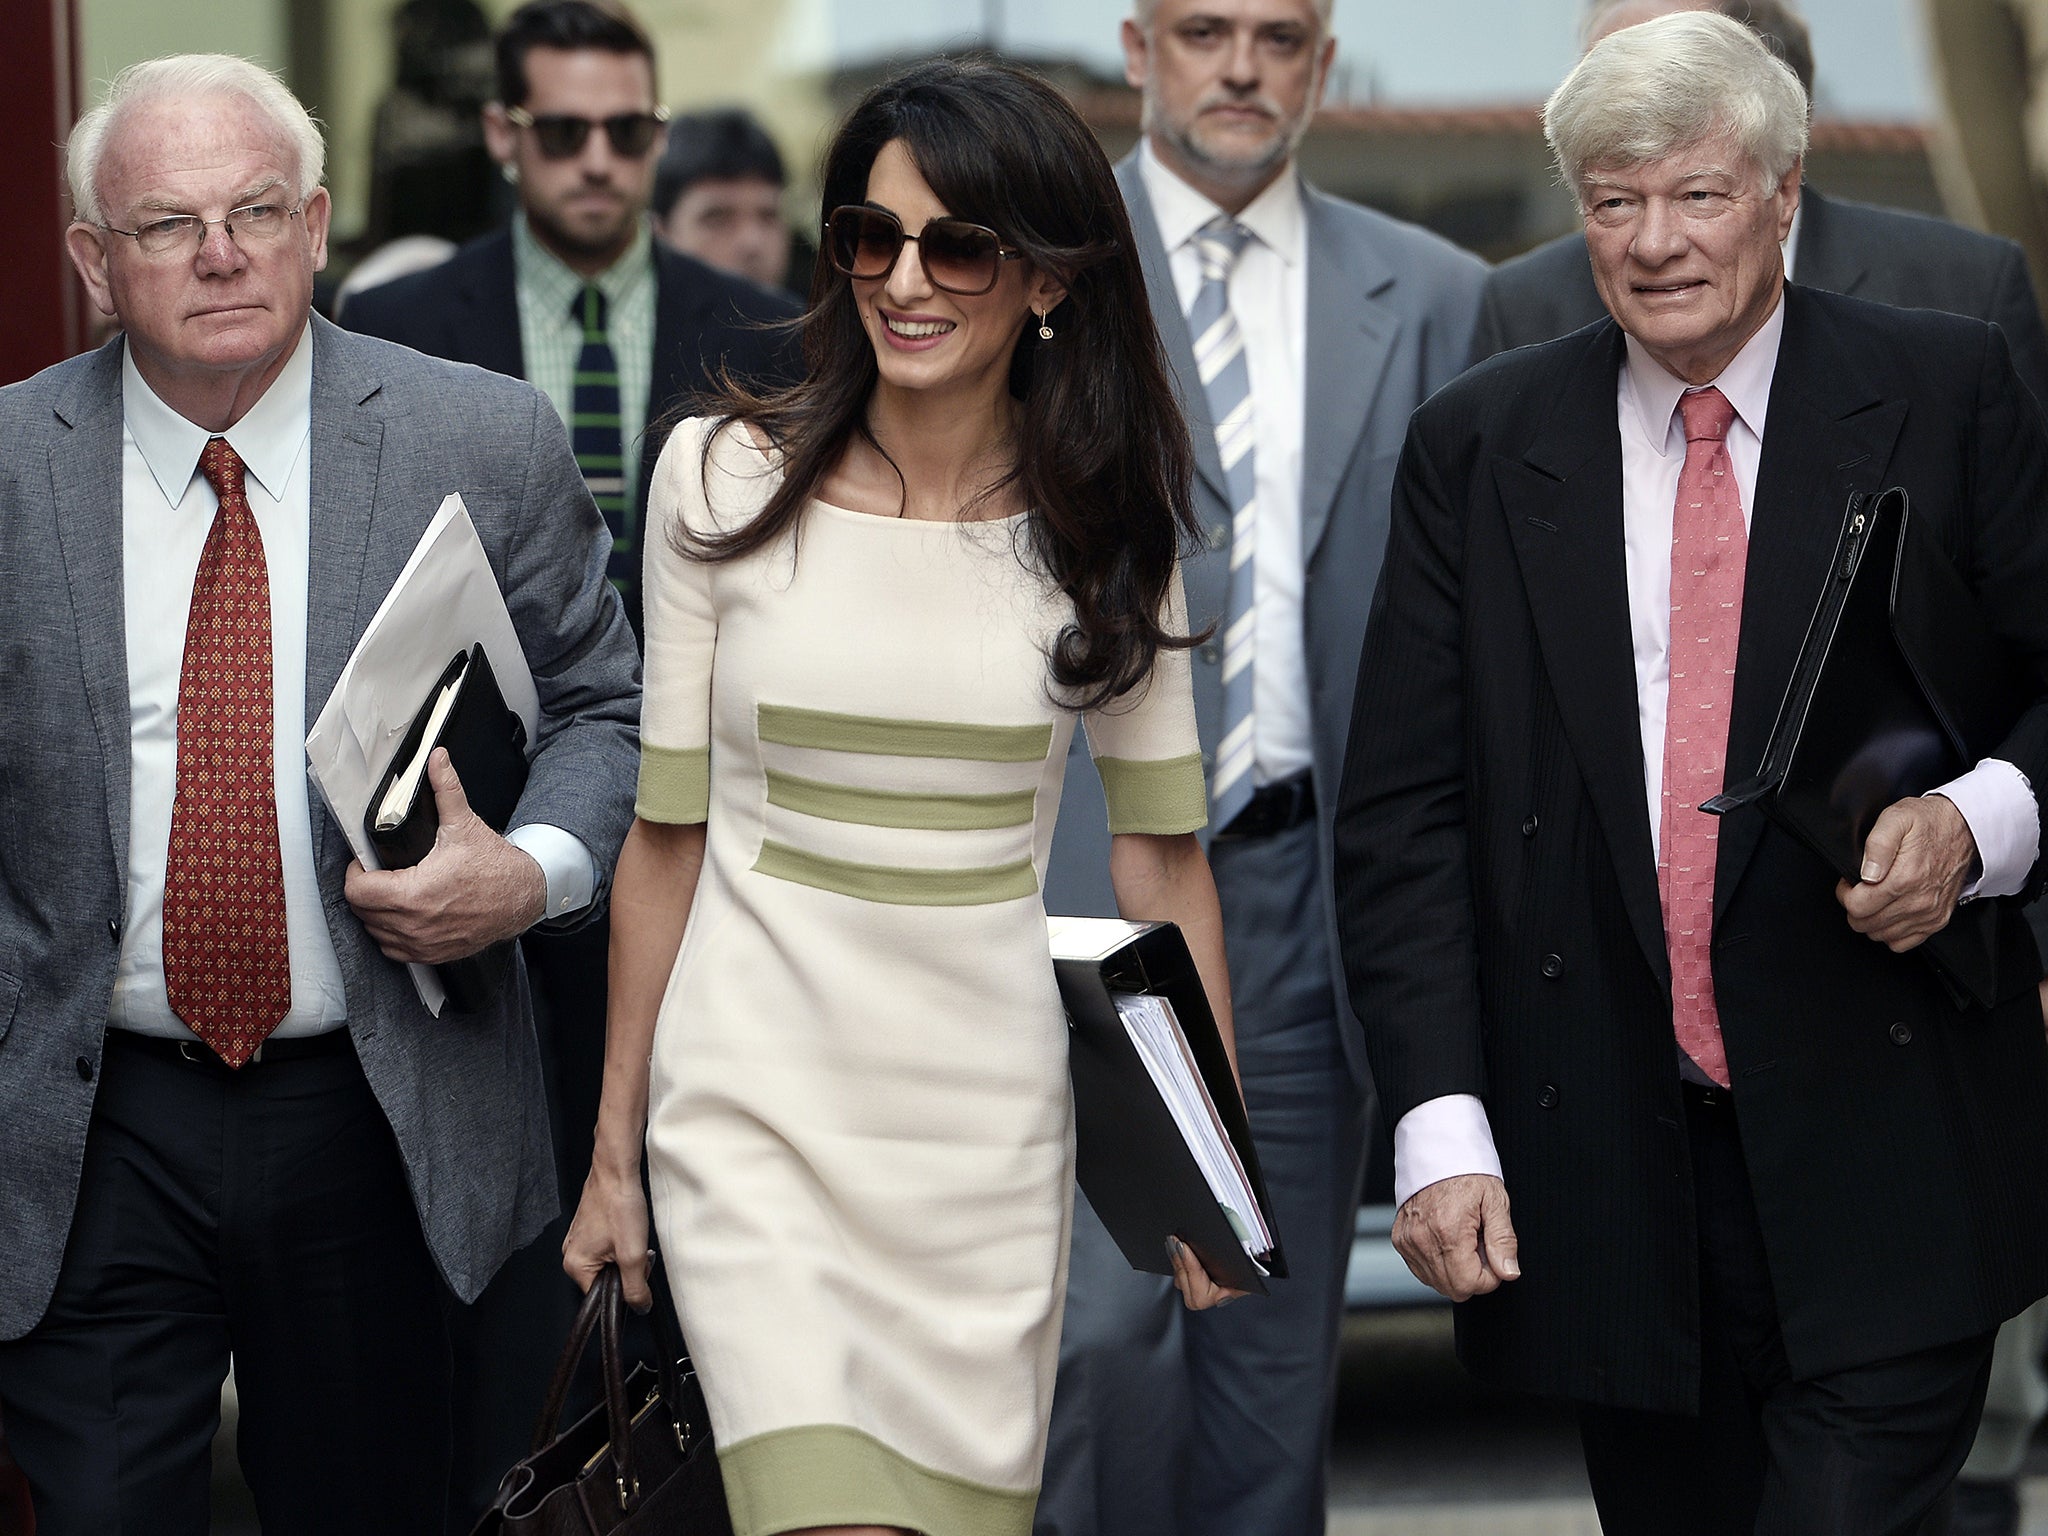 The Greek government sought advice from lawyers Amal Clooney and Geoffrey Robertson over the Elgin Marbles